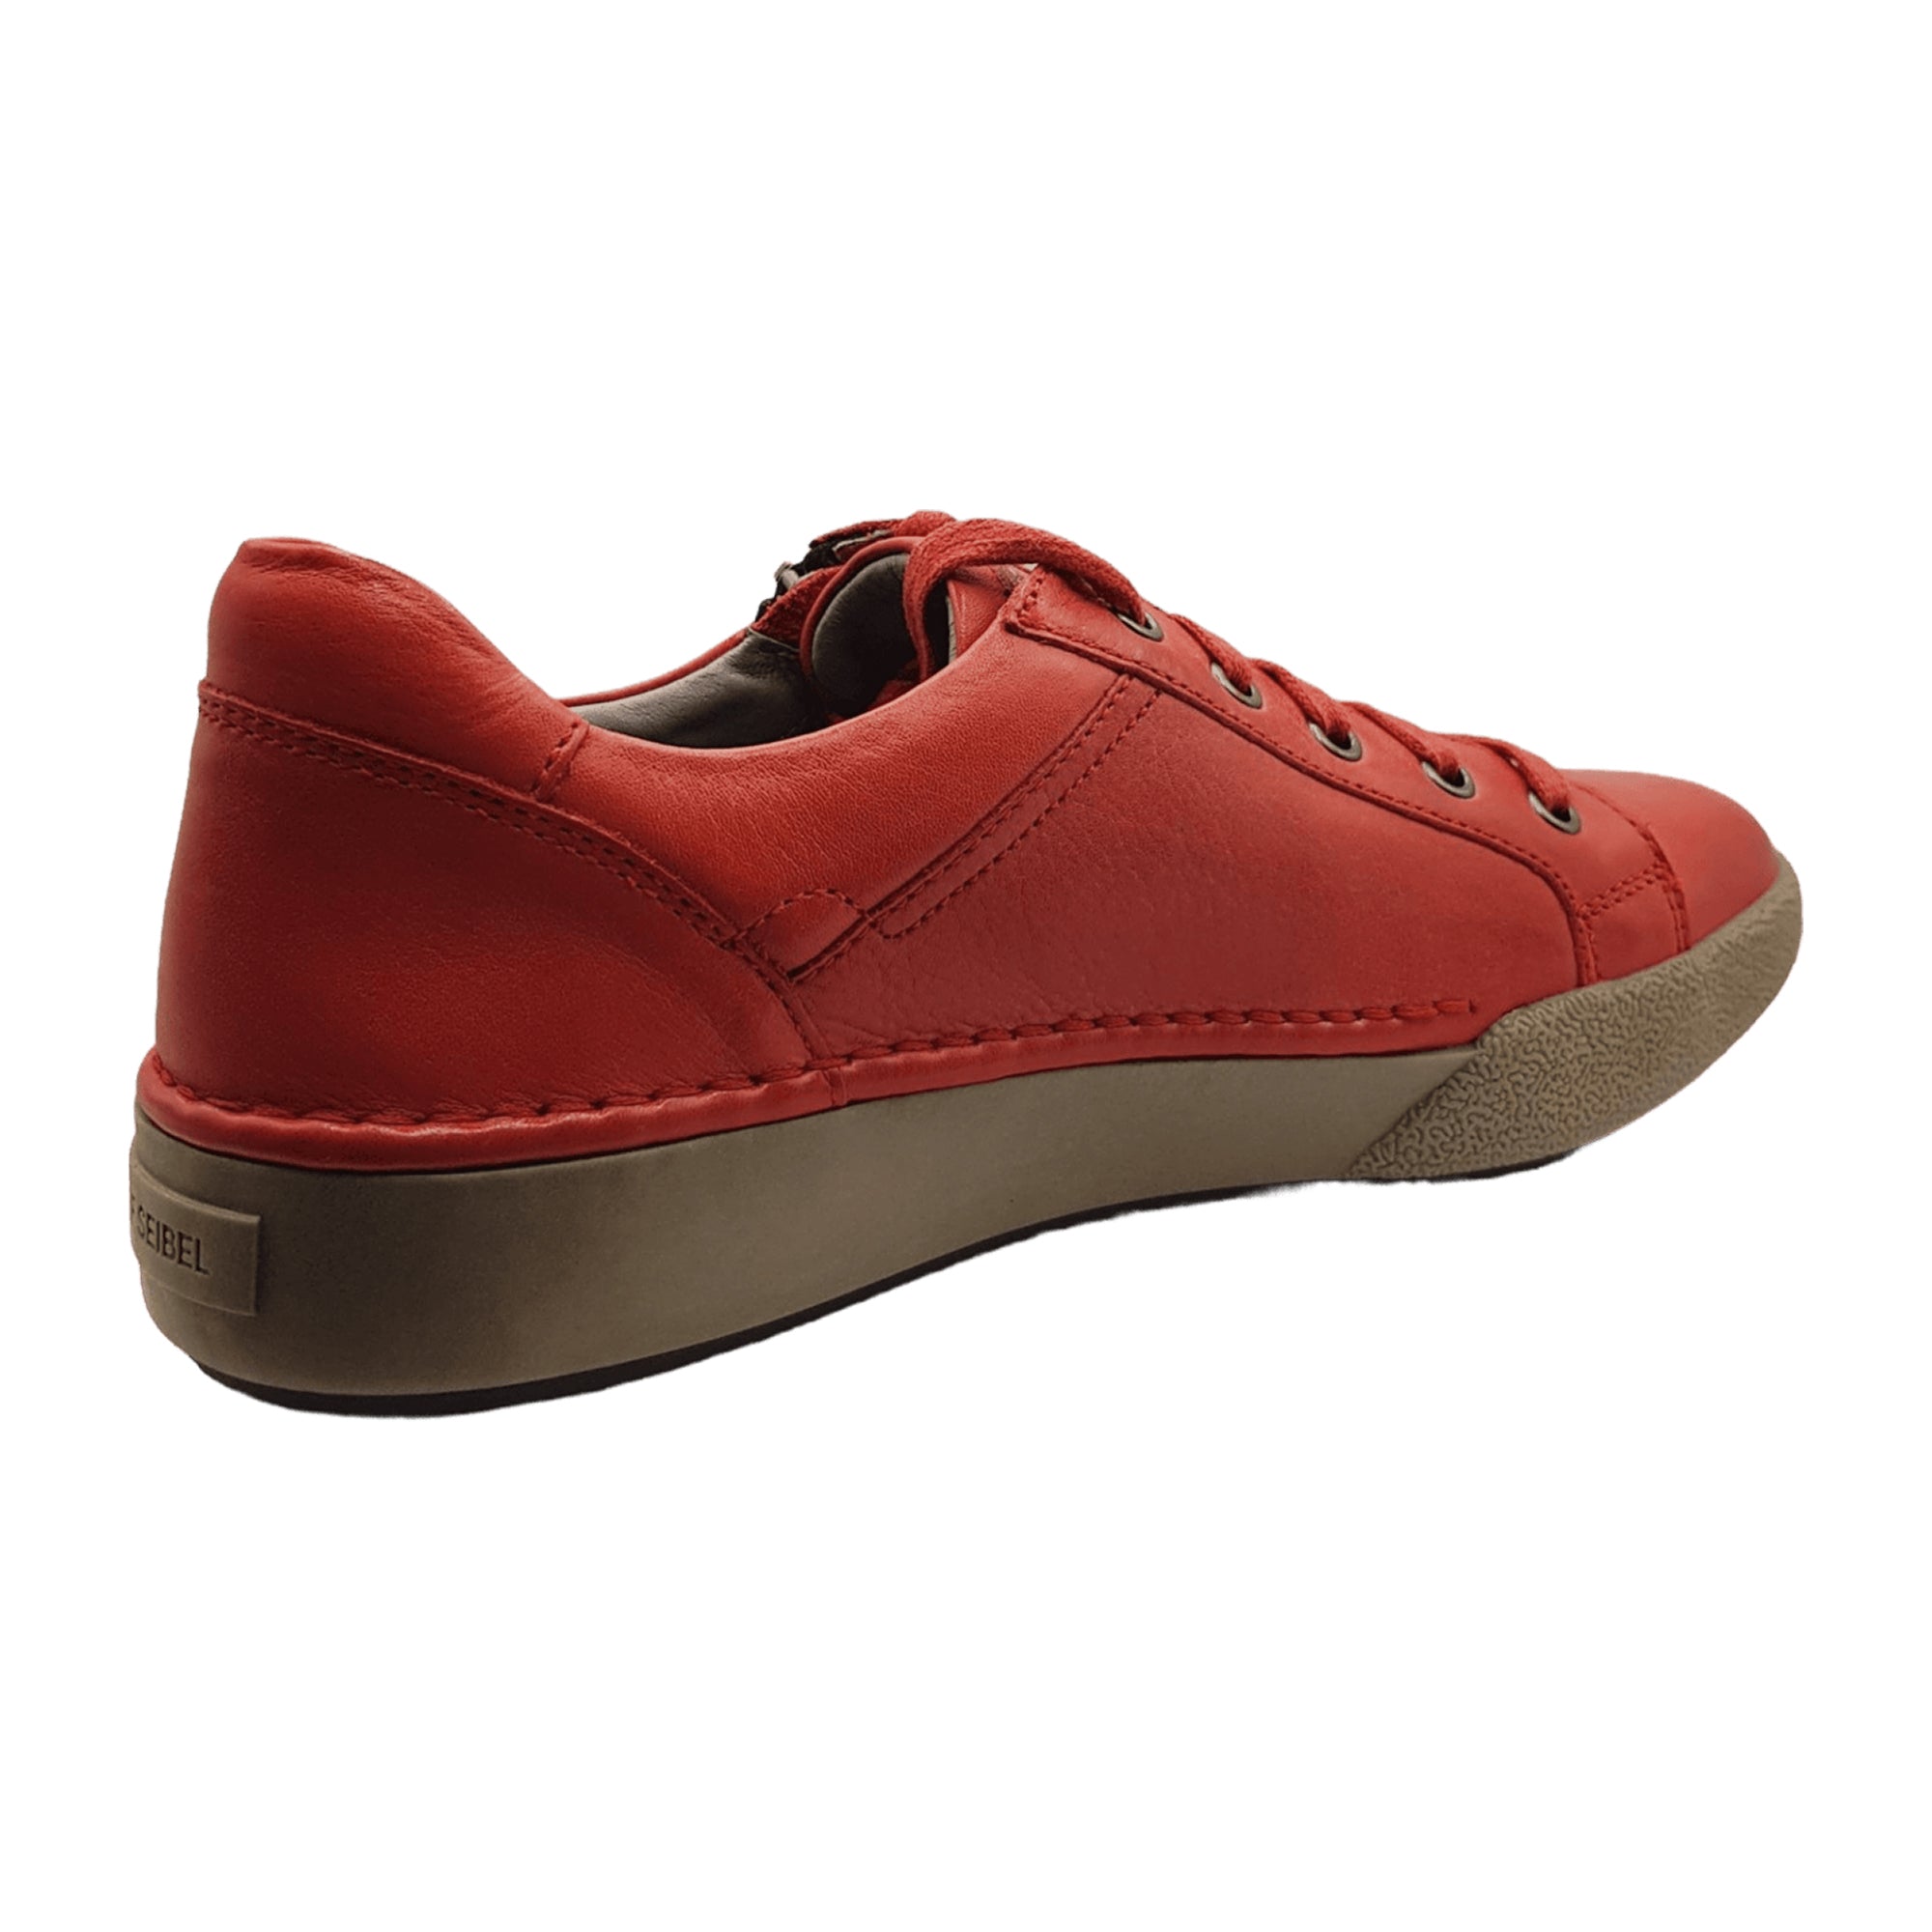 Josef Seibel CLAIRE 13 RED Women's Shoes